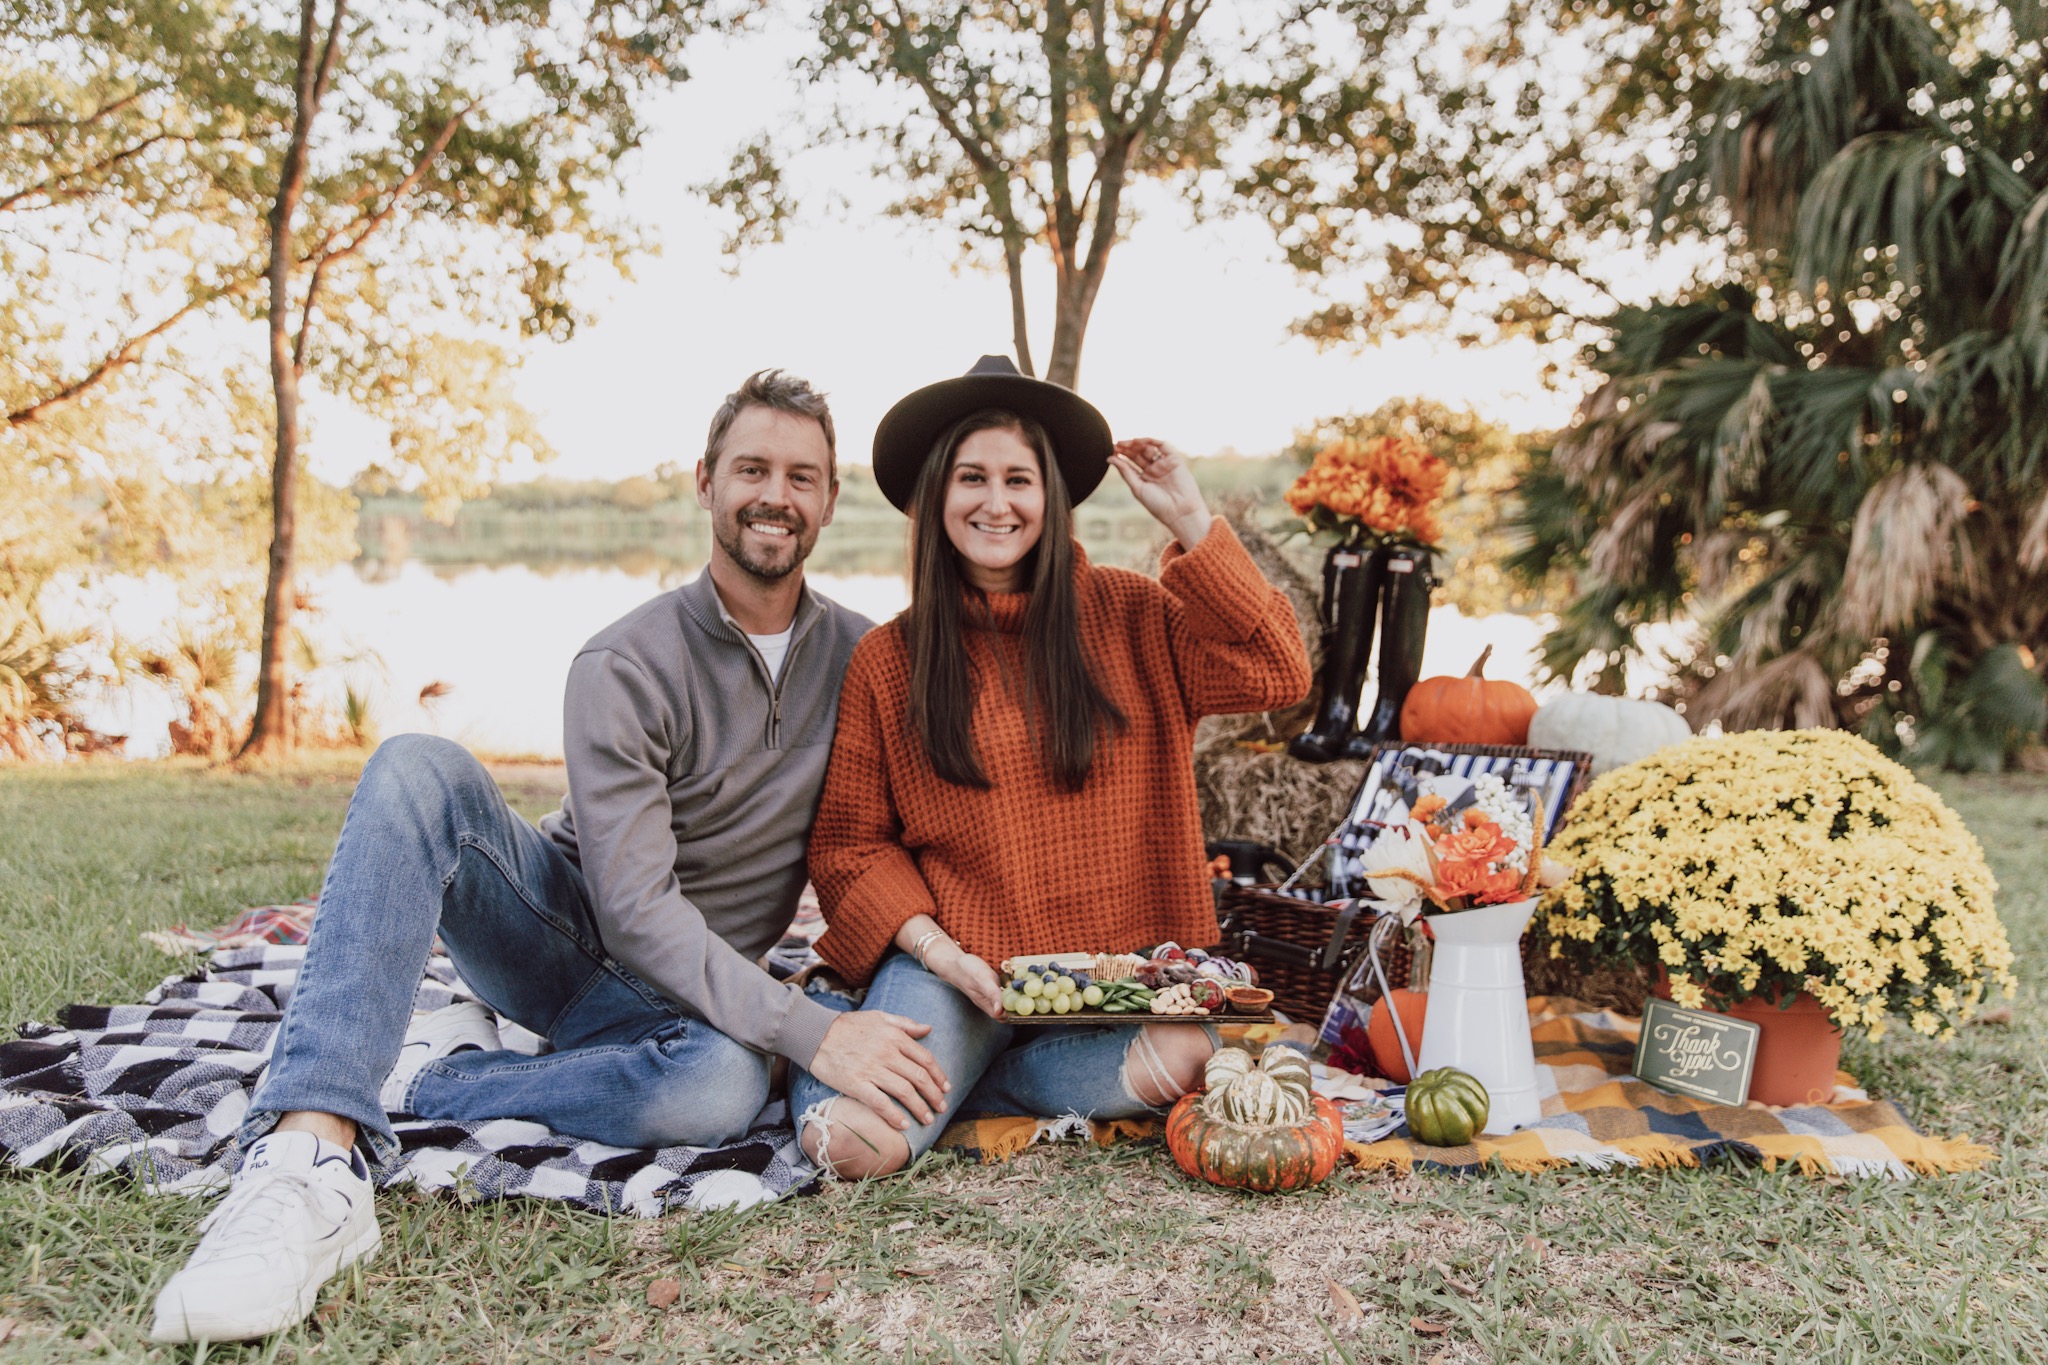 Date night ideas: Fall inspired picnic edition - The Fashionable Maven